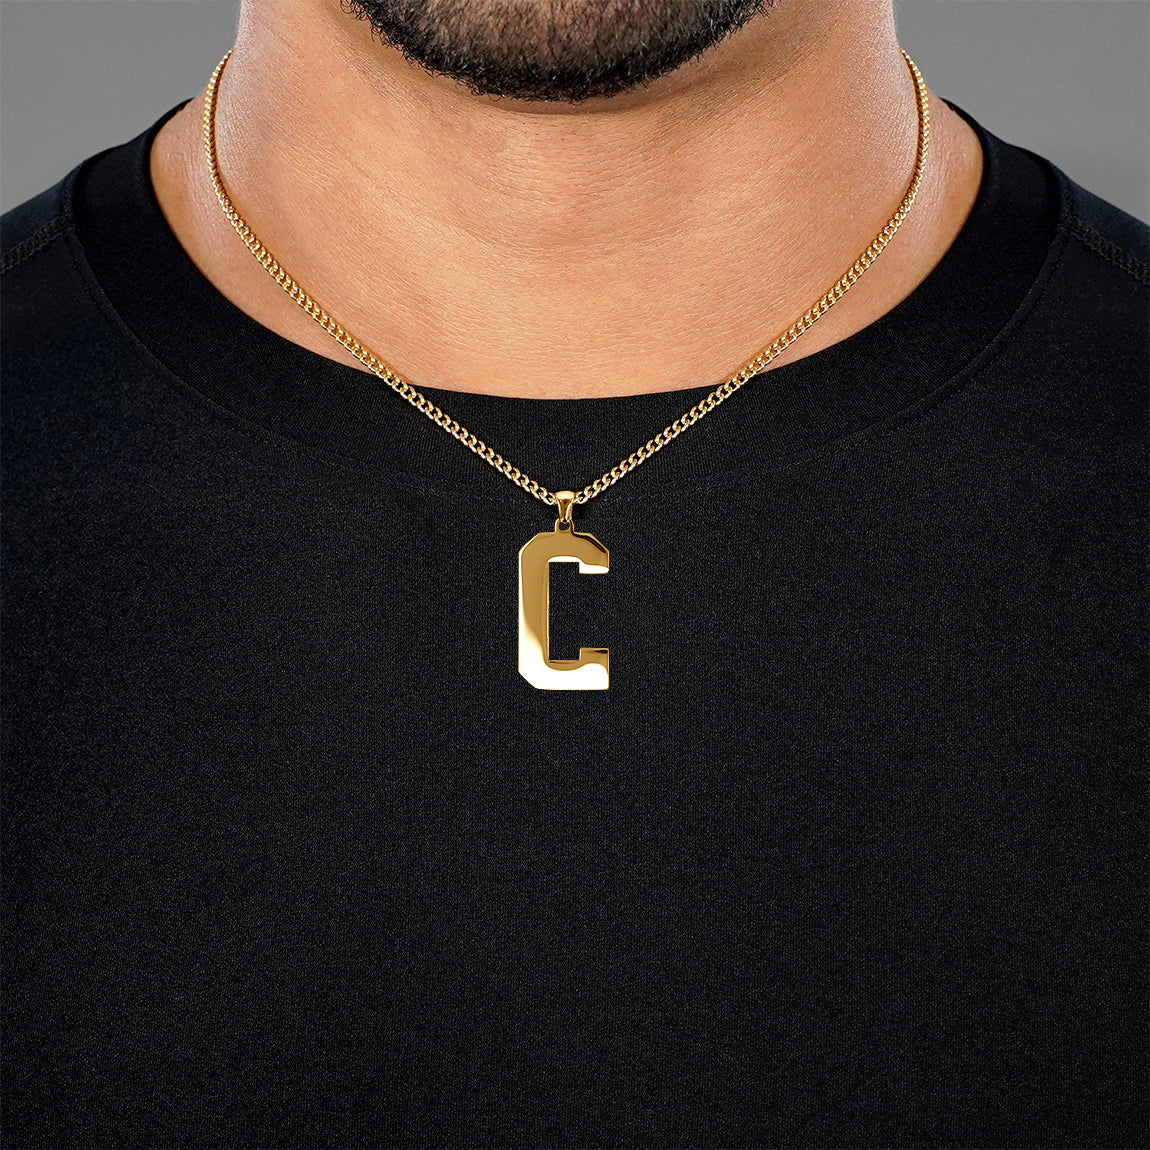 C Letter Pendant with Chain Necklace - Gold Plated Stainless Steel